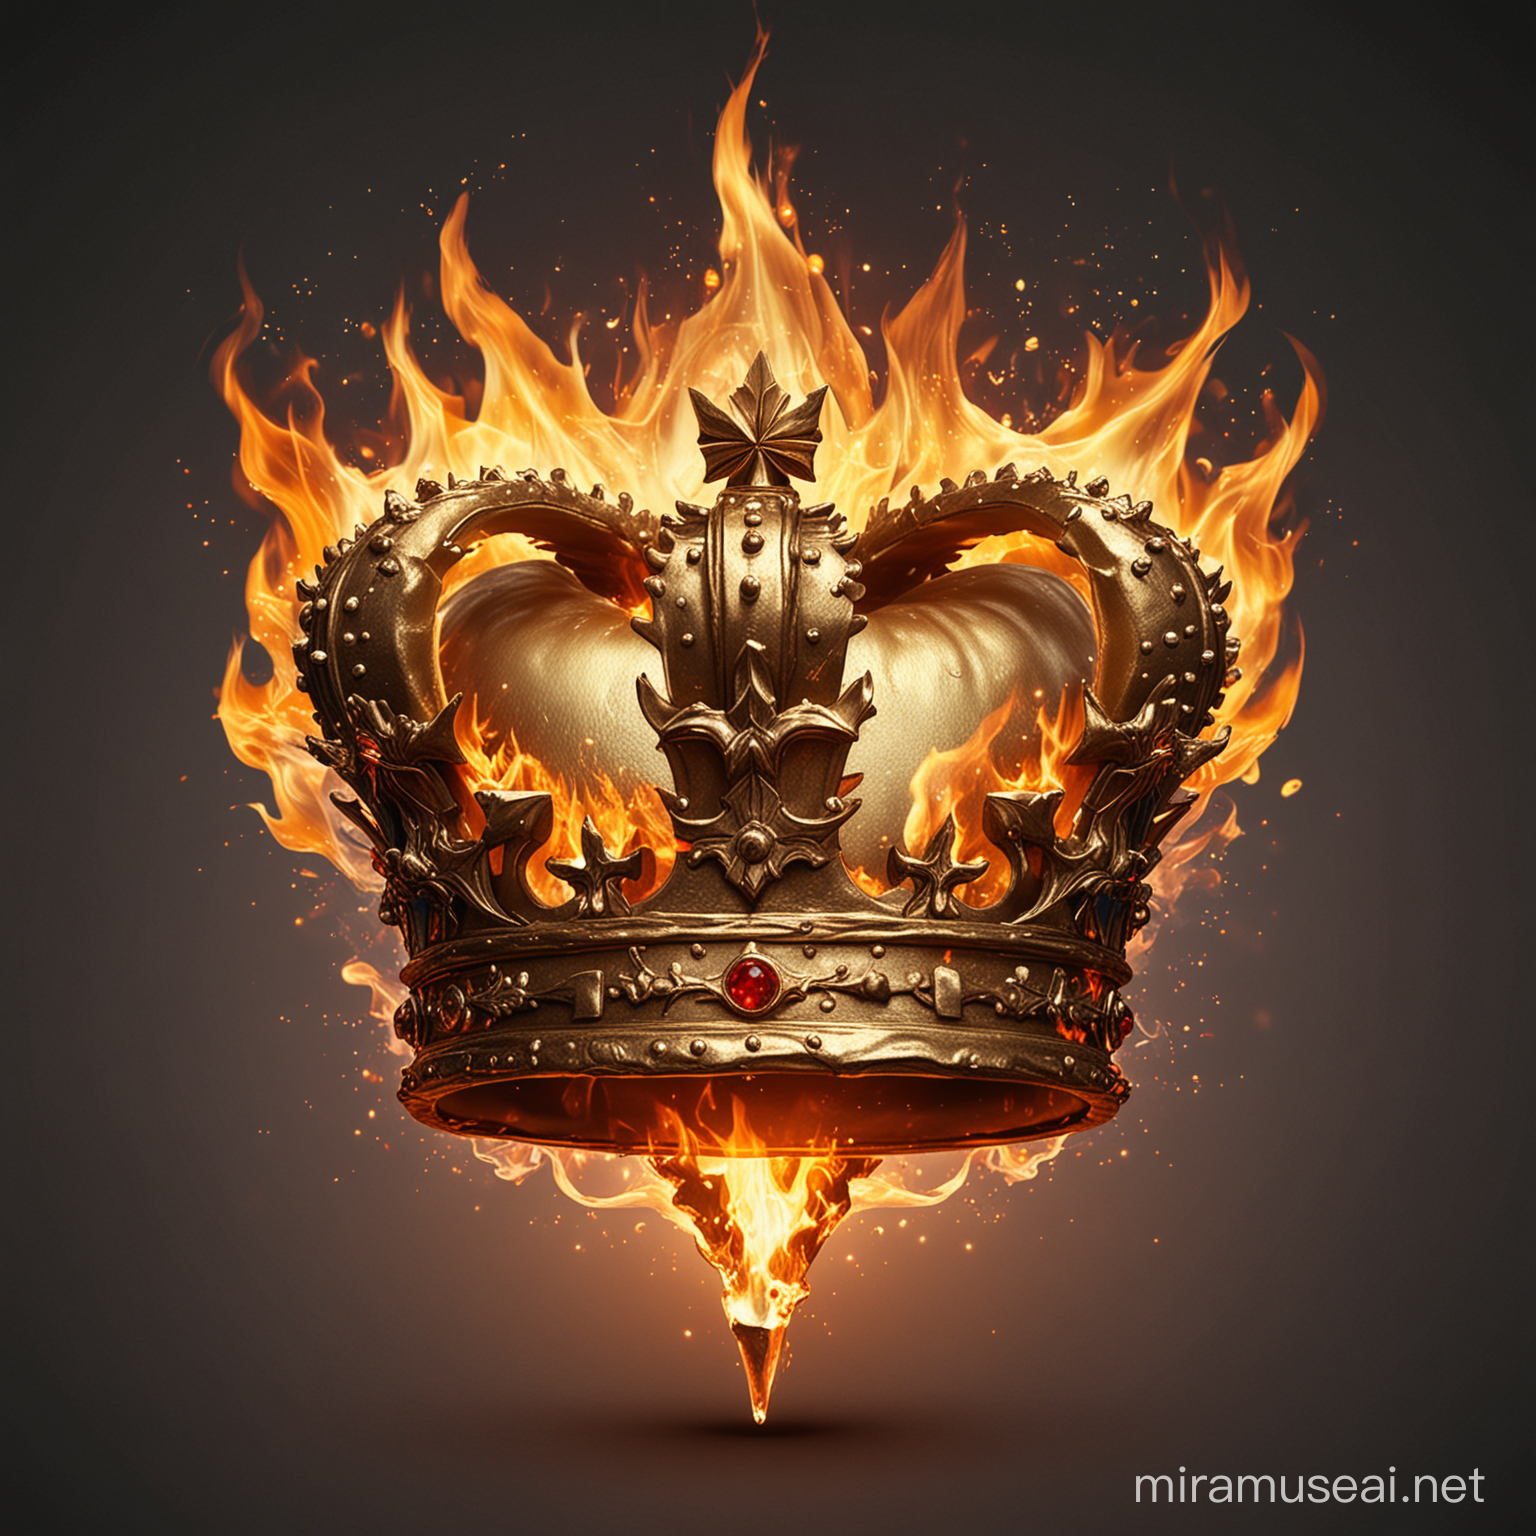 Fiery Golden Crown Symbolic Royalty Ignited